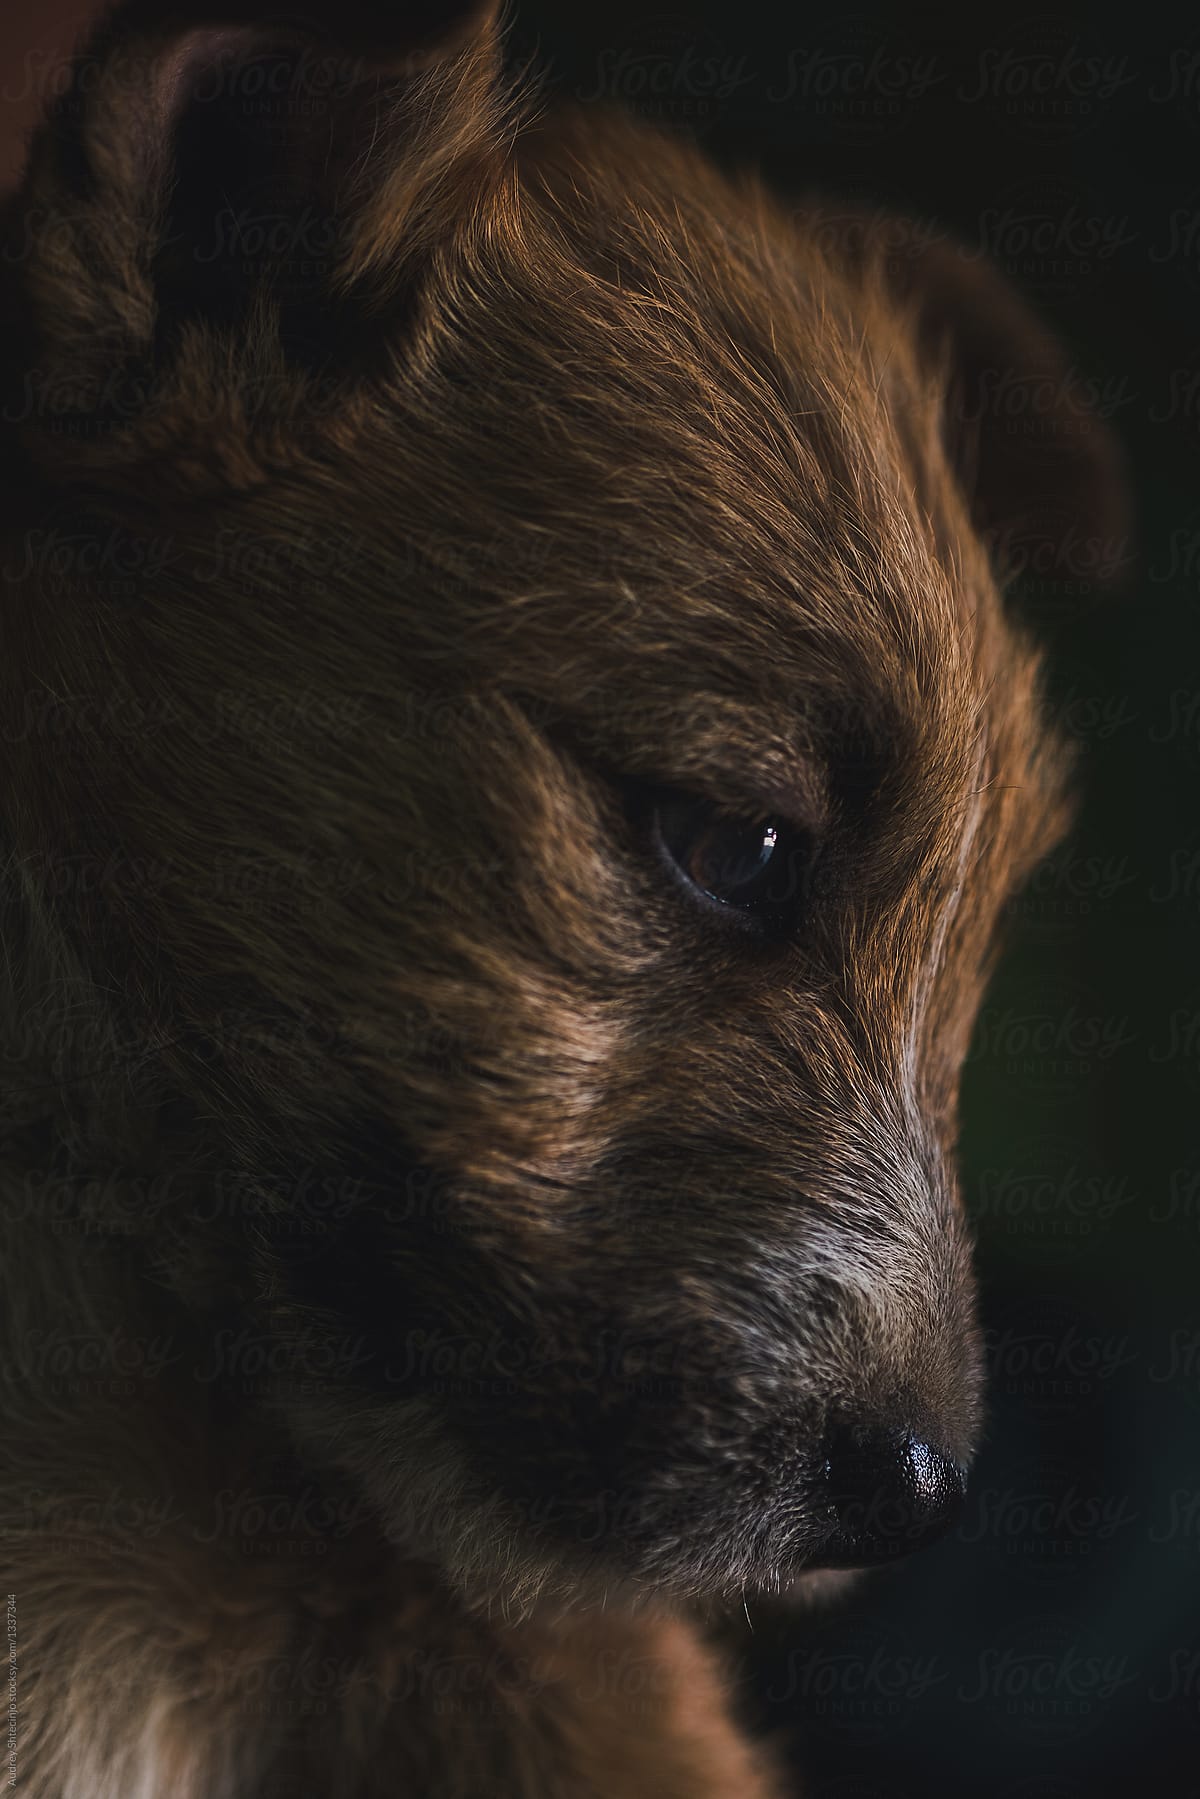 portrait of adopted small street dog/ puppy